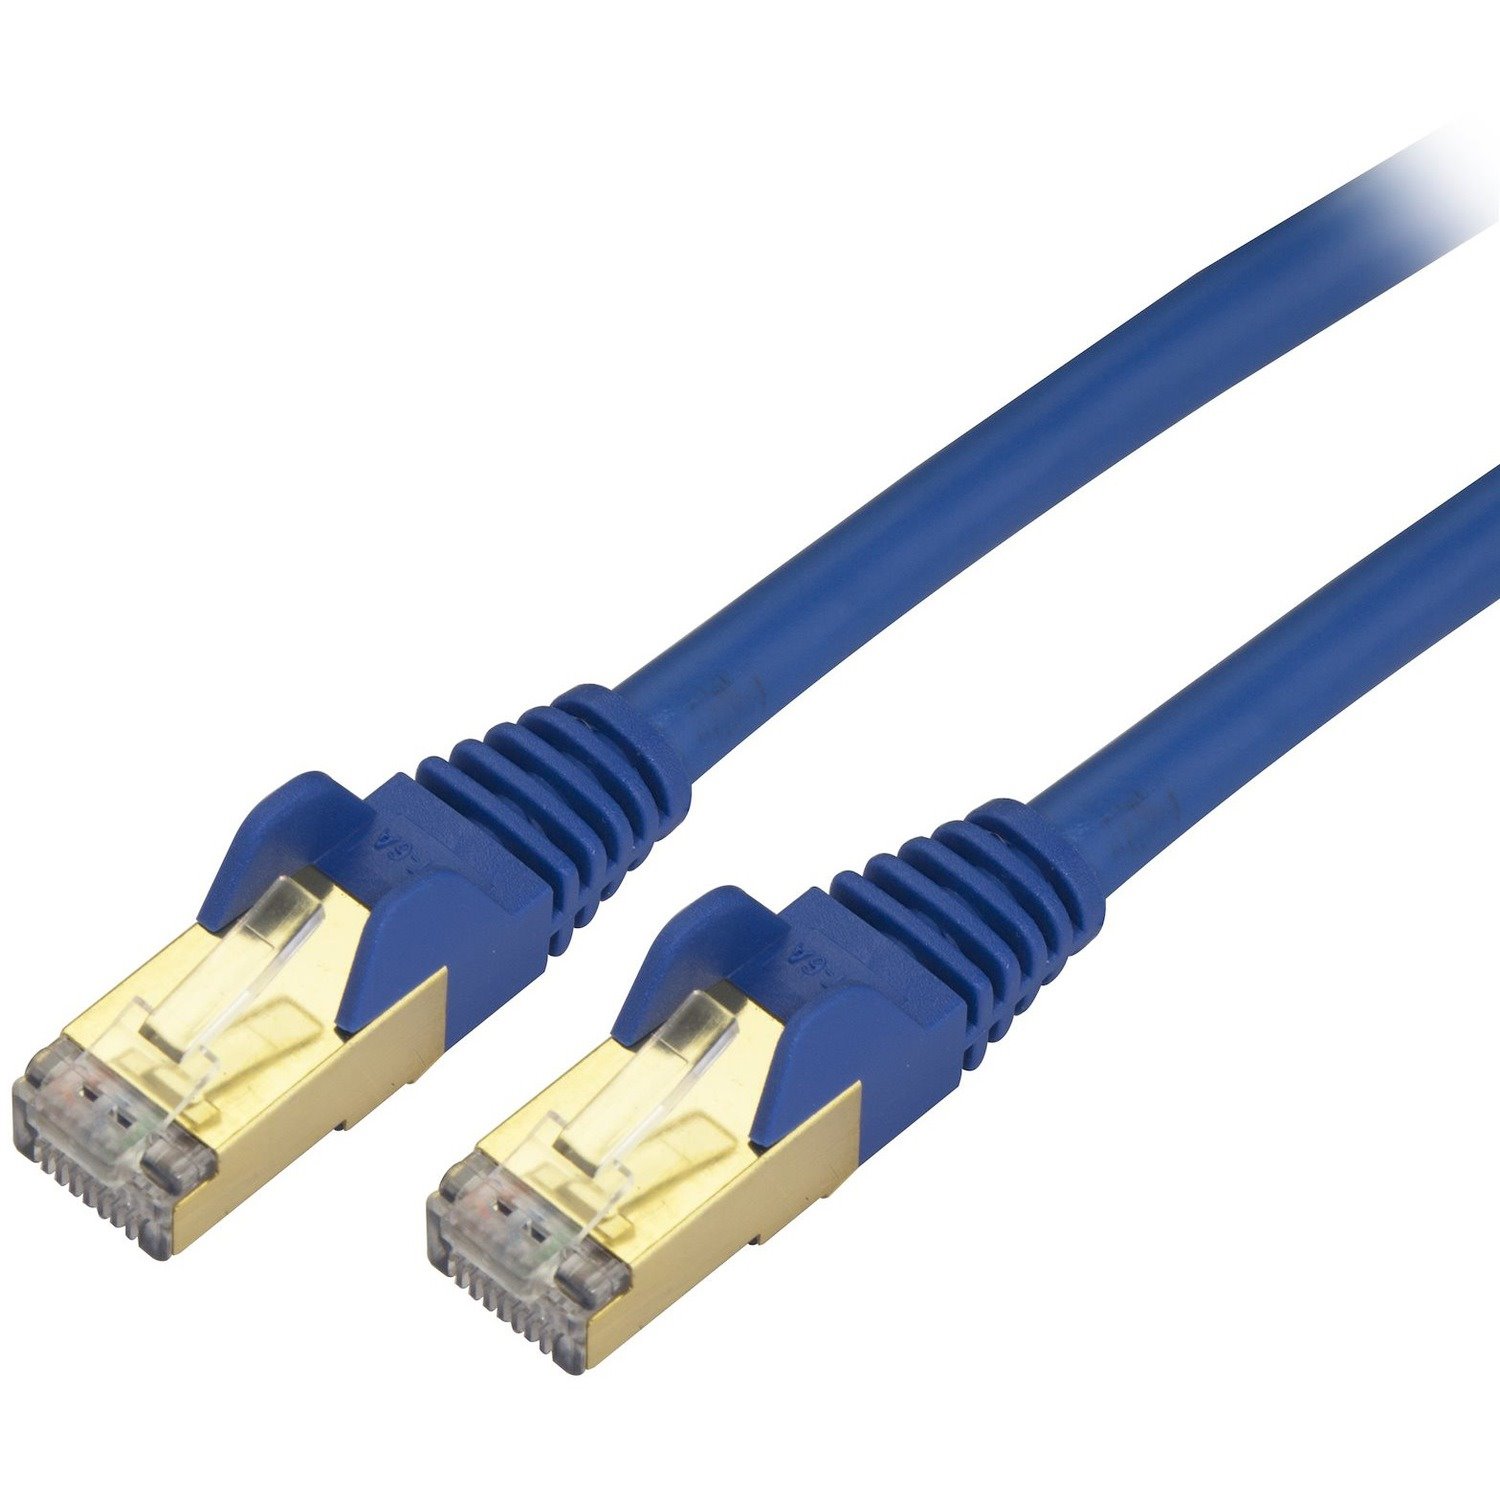 StarTech.com 12ft CAT6a Ethernet Cable - 10 Gigabit Category 6a Shielded Snagless 100W PoE Patch Cord - 10GbE Blue UL Certified Wiring/TIA